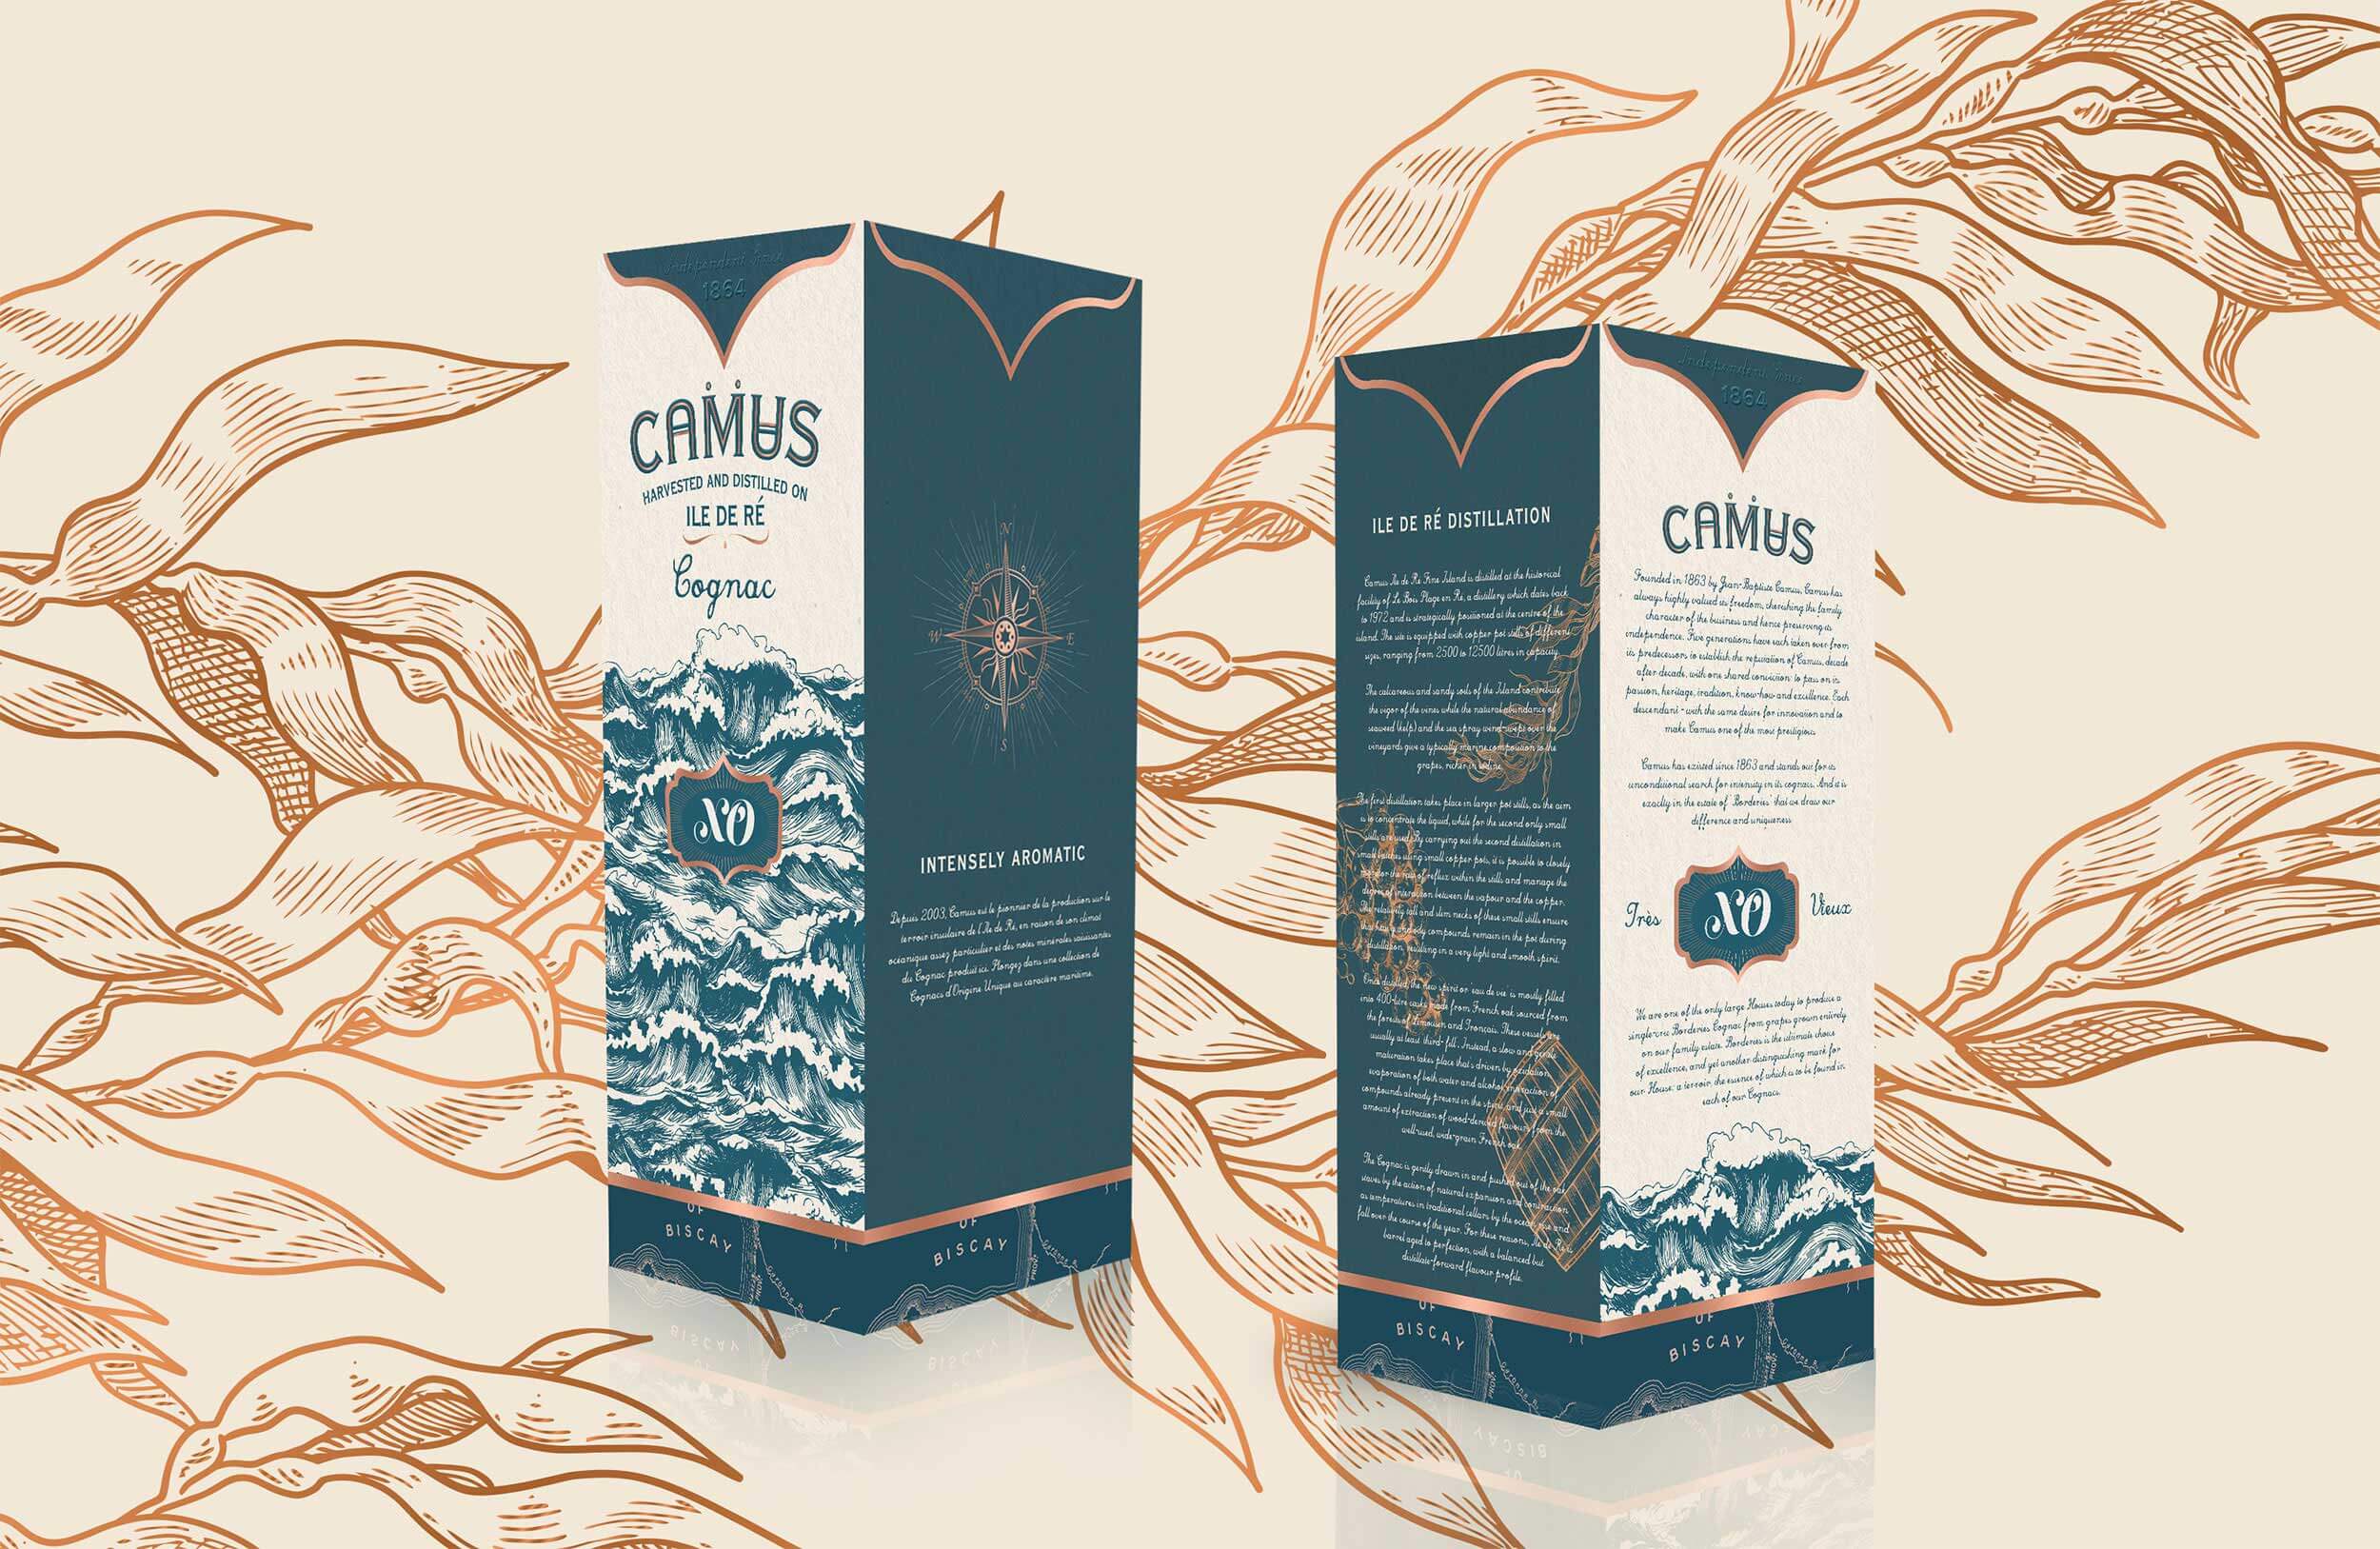 Camus bottle package redesign